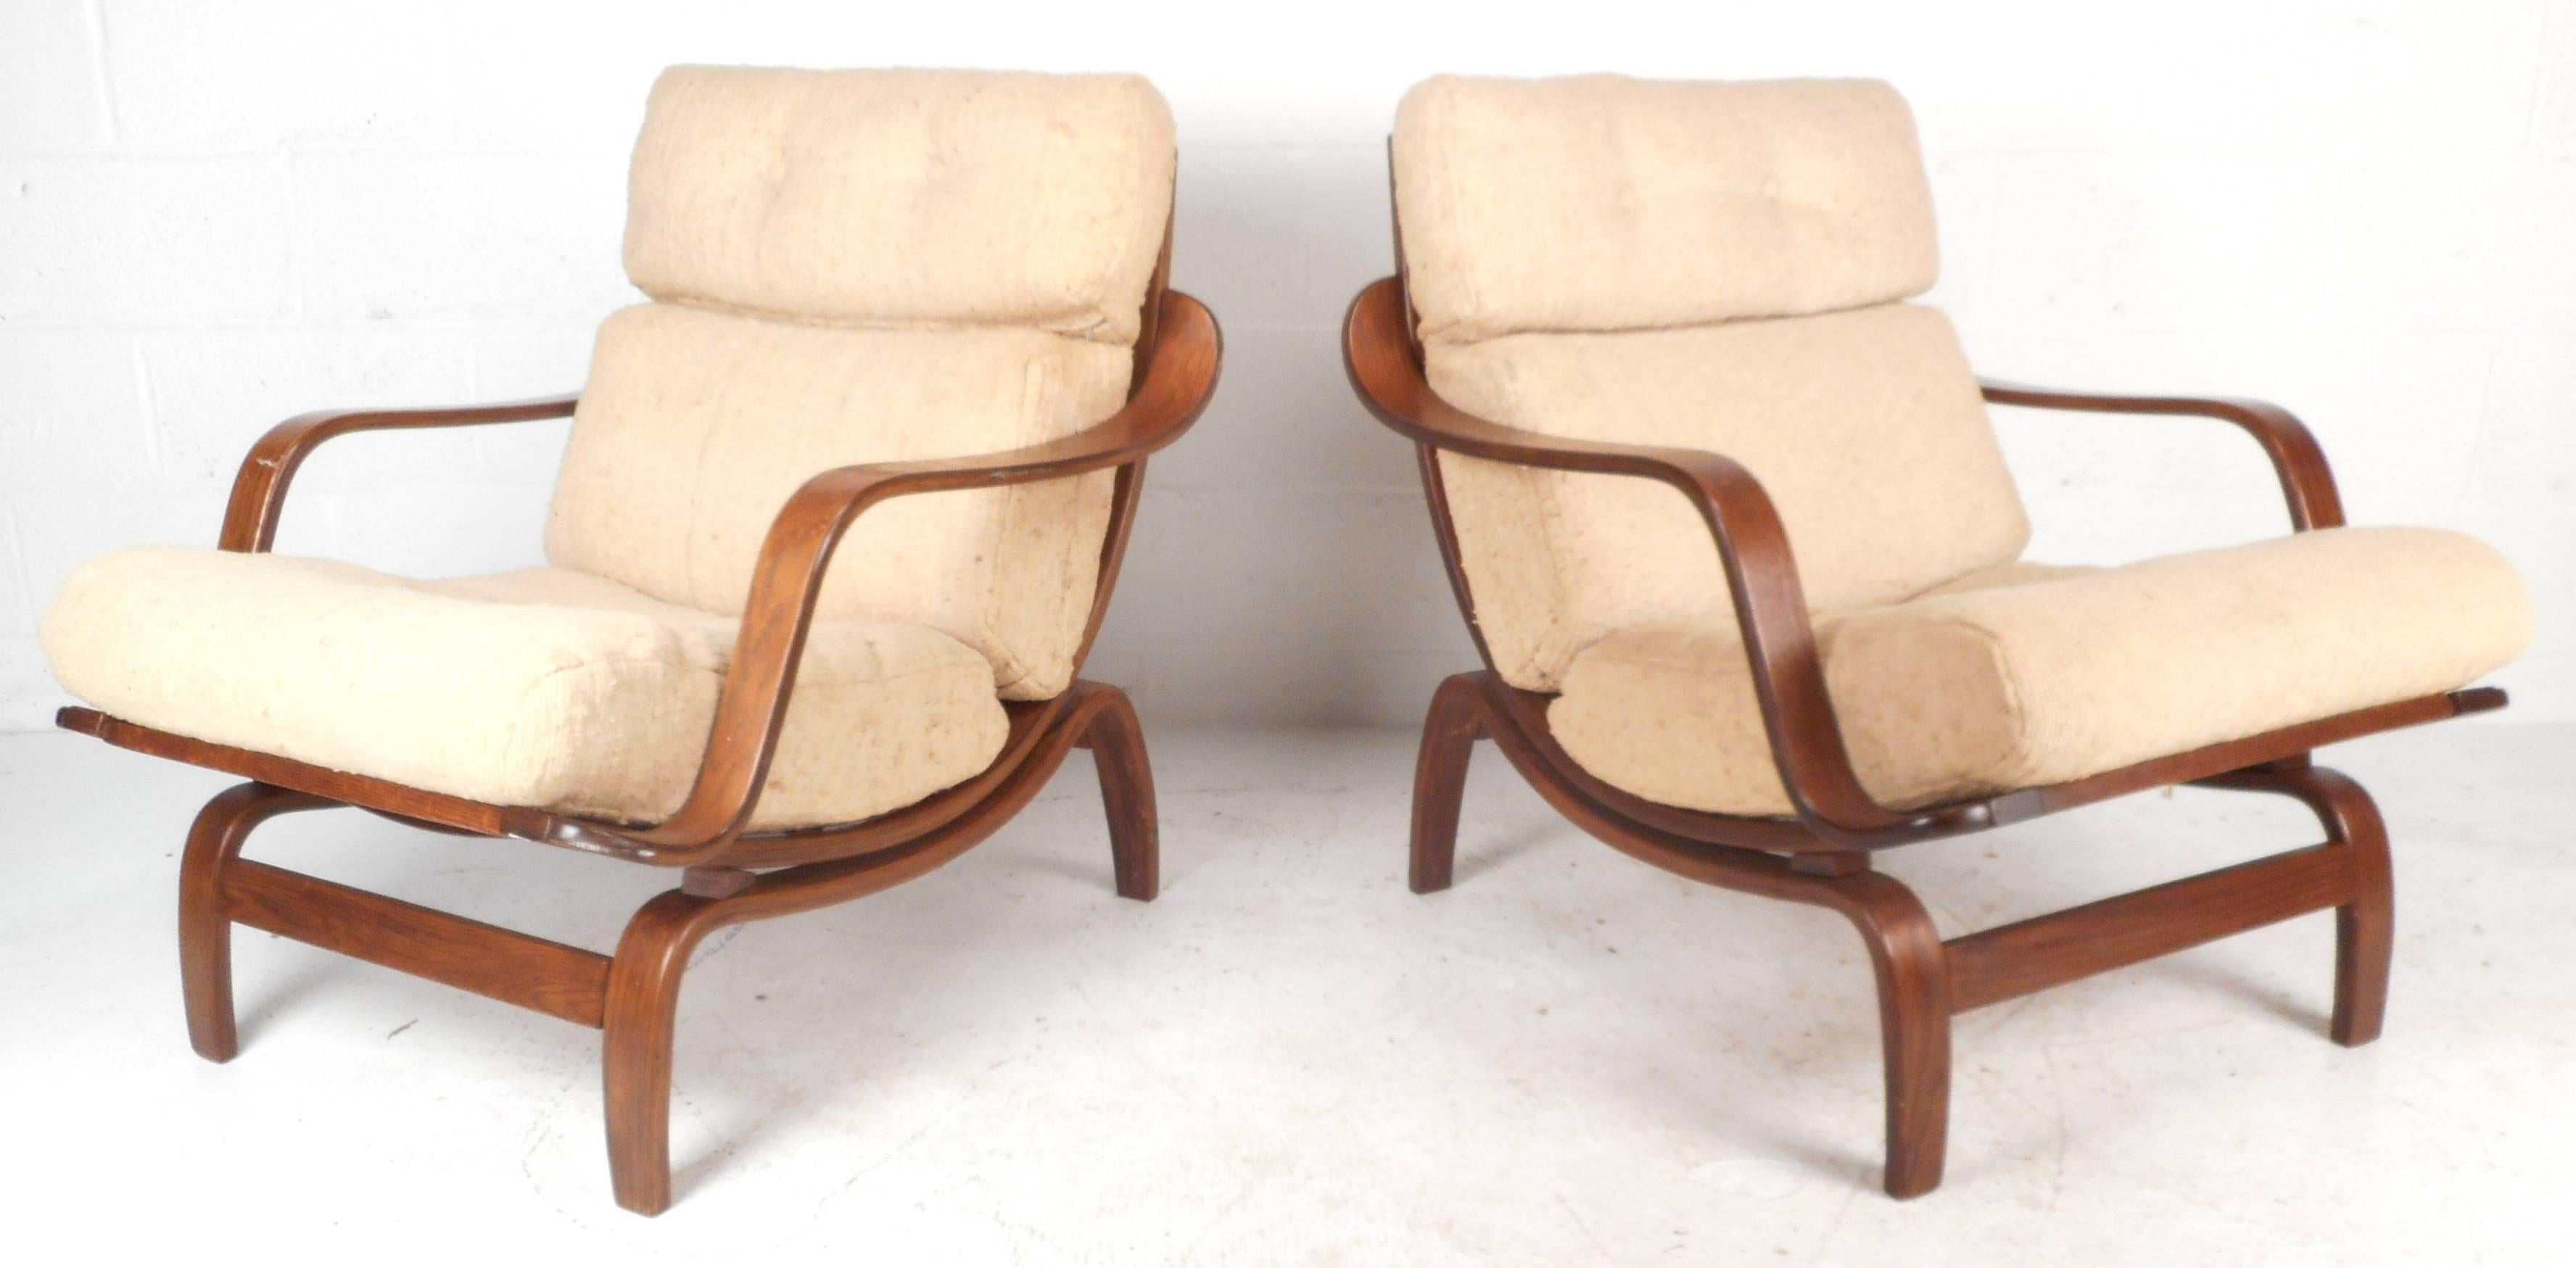 Pair of stylish sculpted bentwood lounge chairs with plush cream colored upholstery. Unique sculpted bentwood design features vintage walnut finish and tufted head rests add to their incredible comfort. Please confirm item location (NY or NJ).